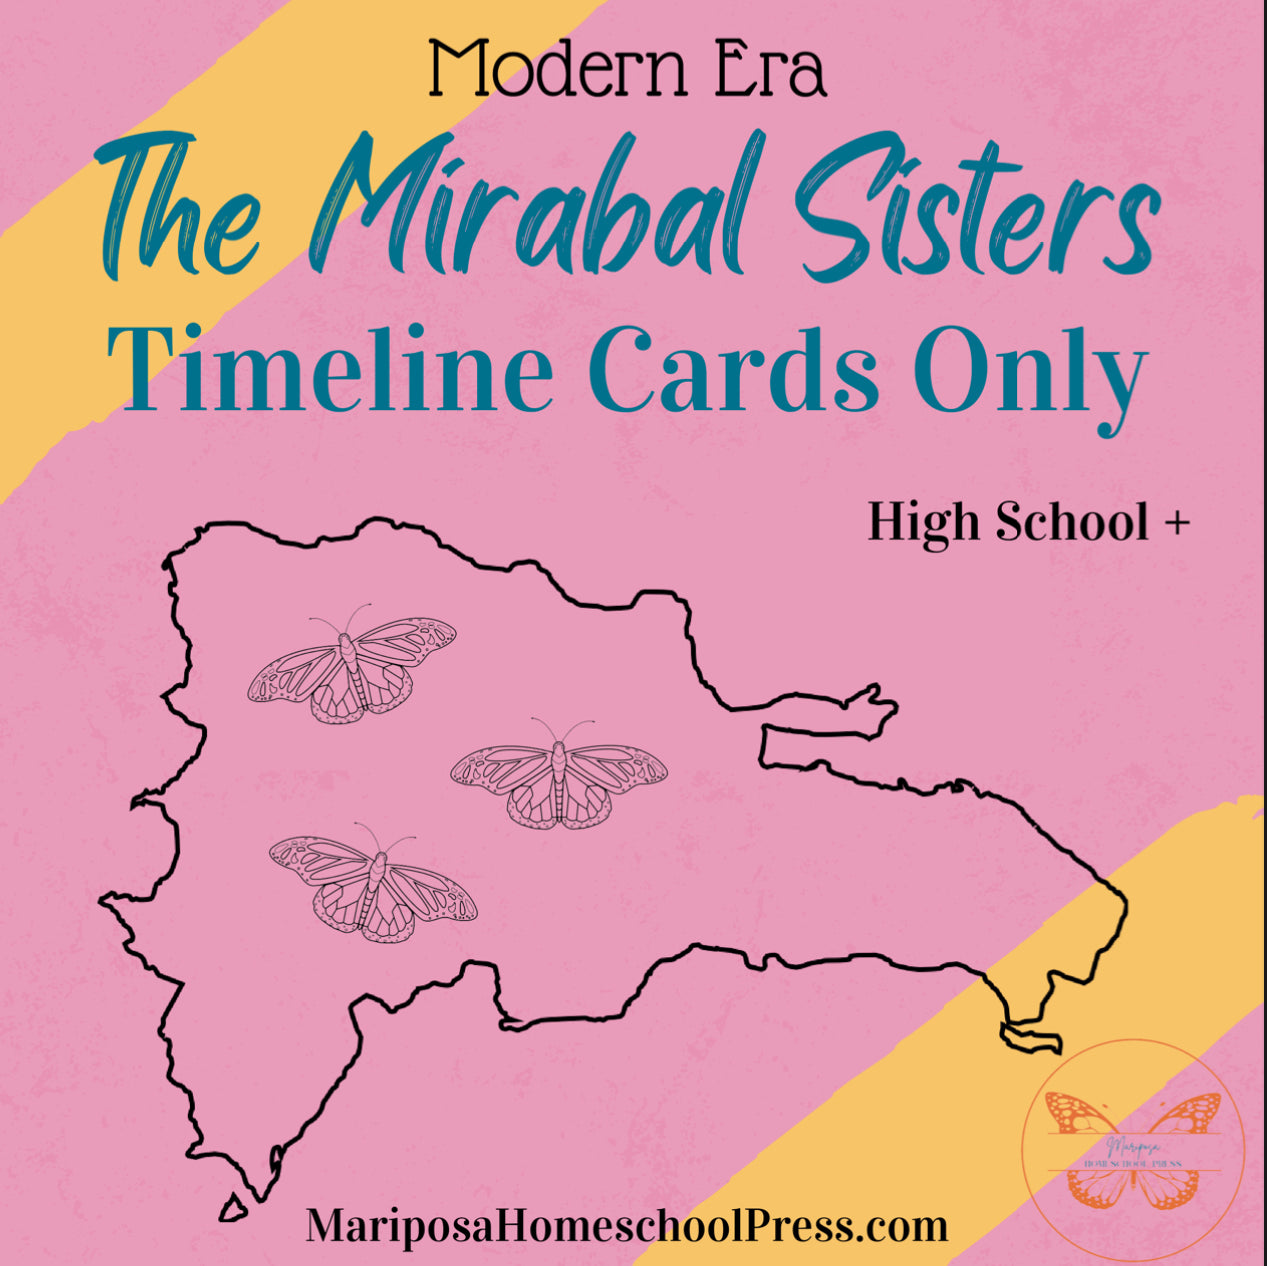 Mirabal Sisters Timeline Cards Only